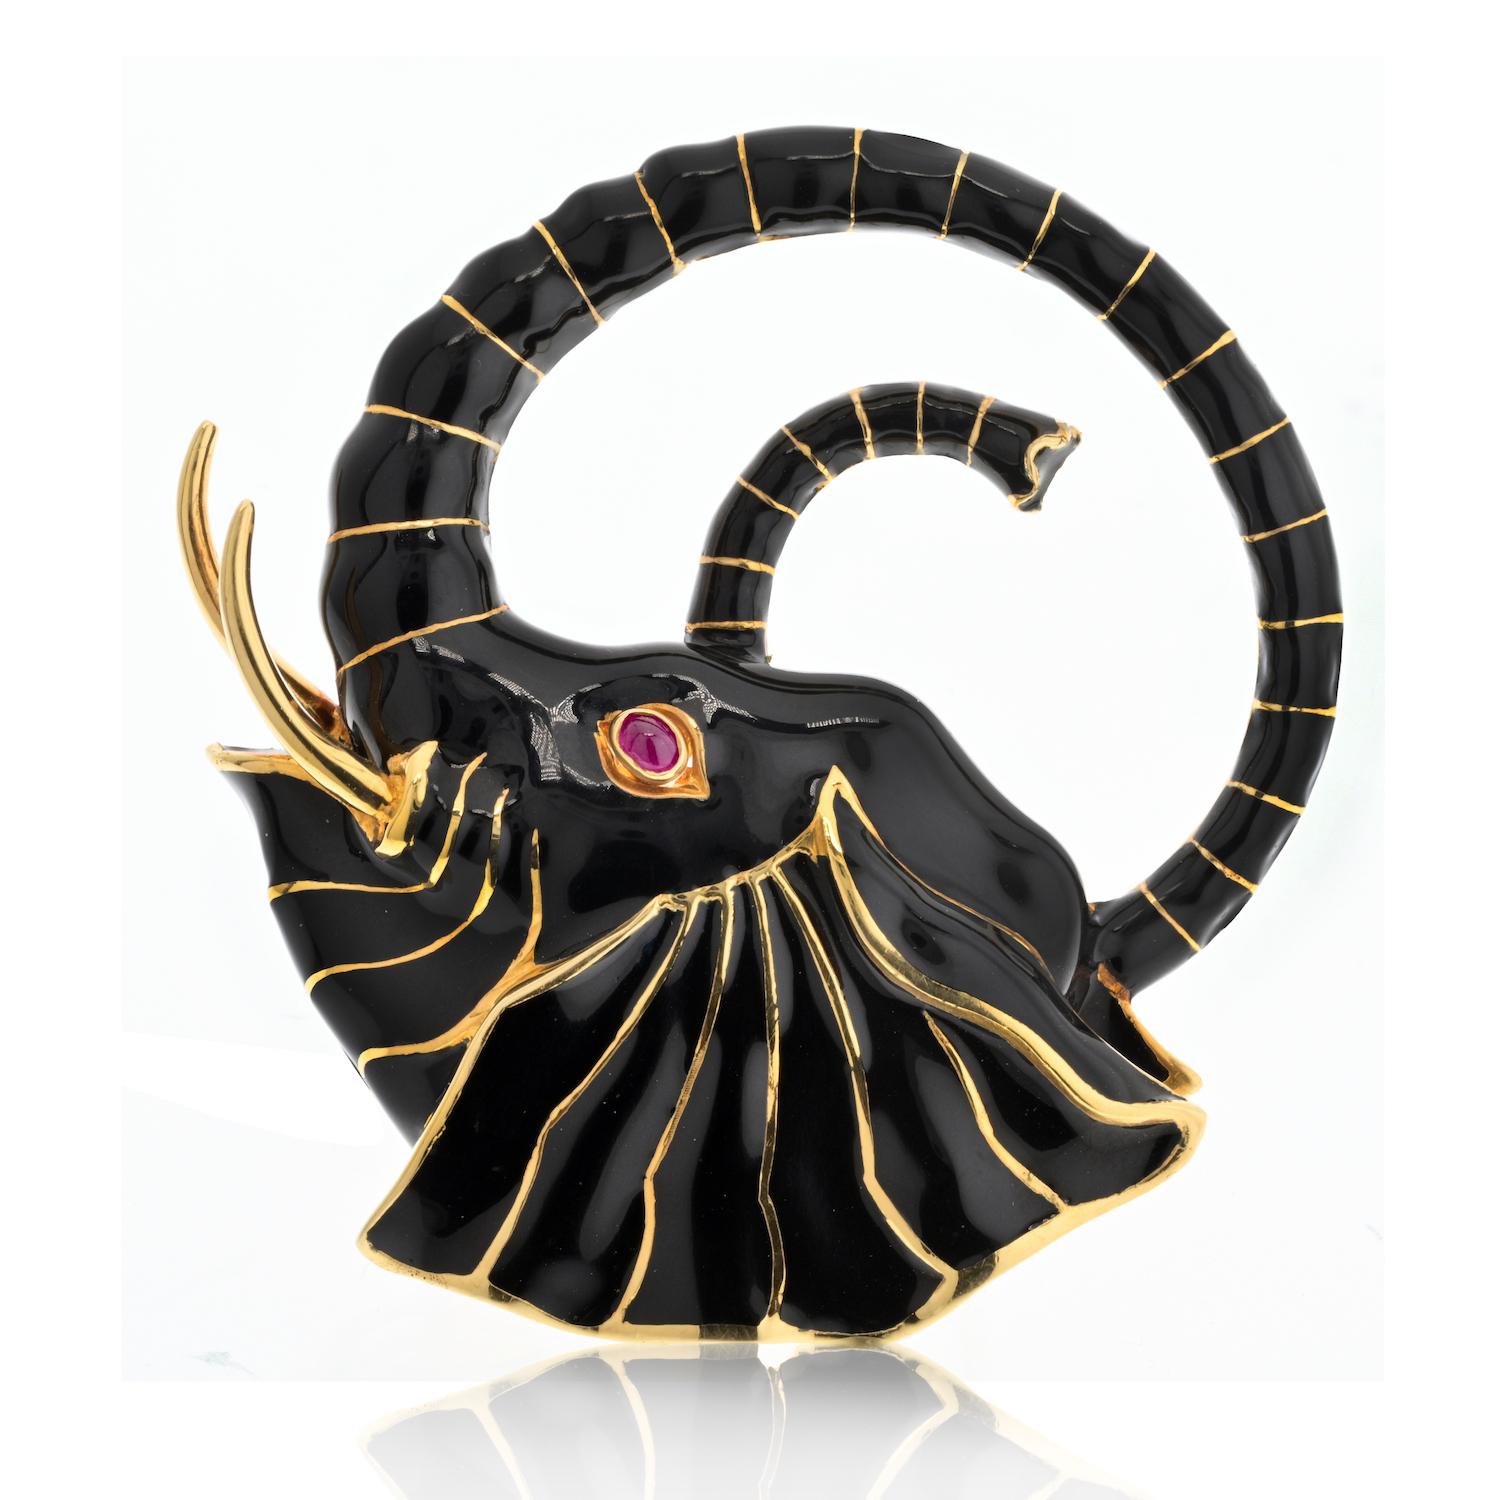 Indulge in the majestic allure of the David Webb Platinum & 18K Yellow Gold Black Enamel Elephant Brooch. This exquisite piece of wearable art is designed as a masterful fusion of black enamel and sculpted 18k gold, capturing the regal essence of an